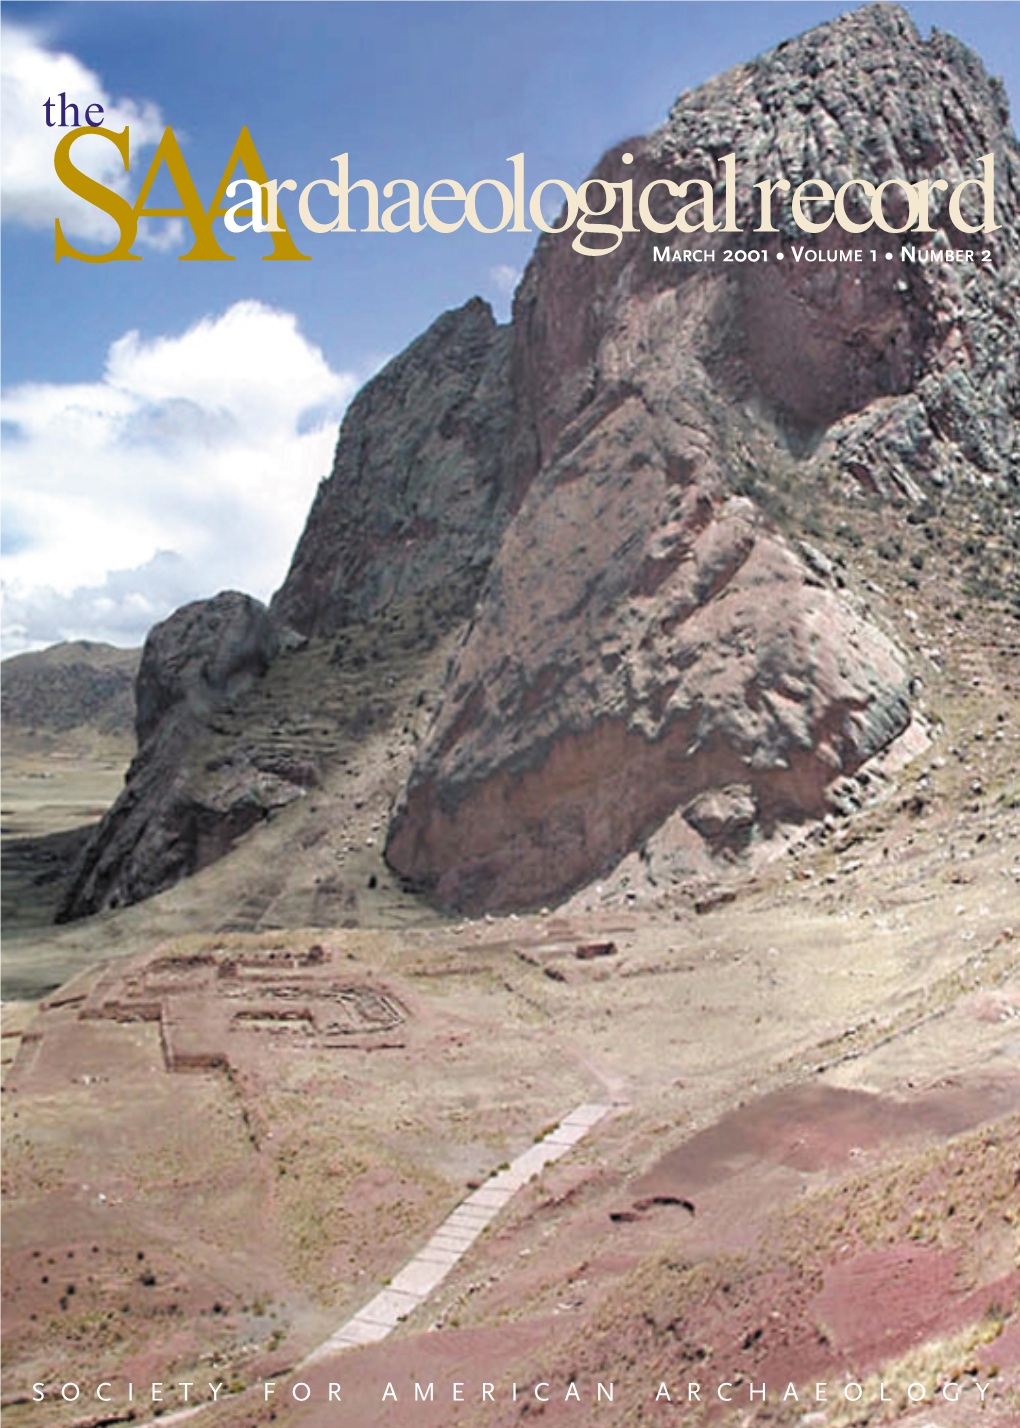 Saaarchaeologicalrecord the Magazine of the Society for American Archaeology Volume 1, No